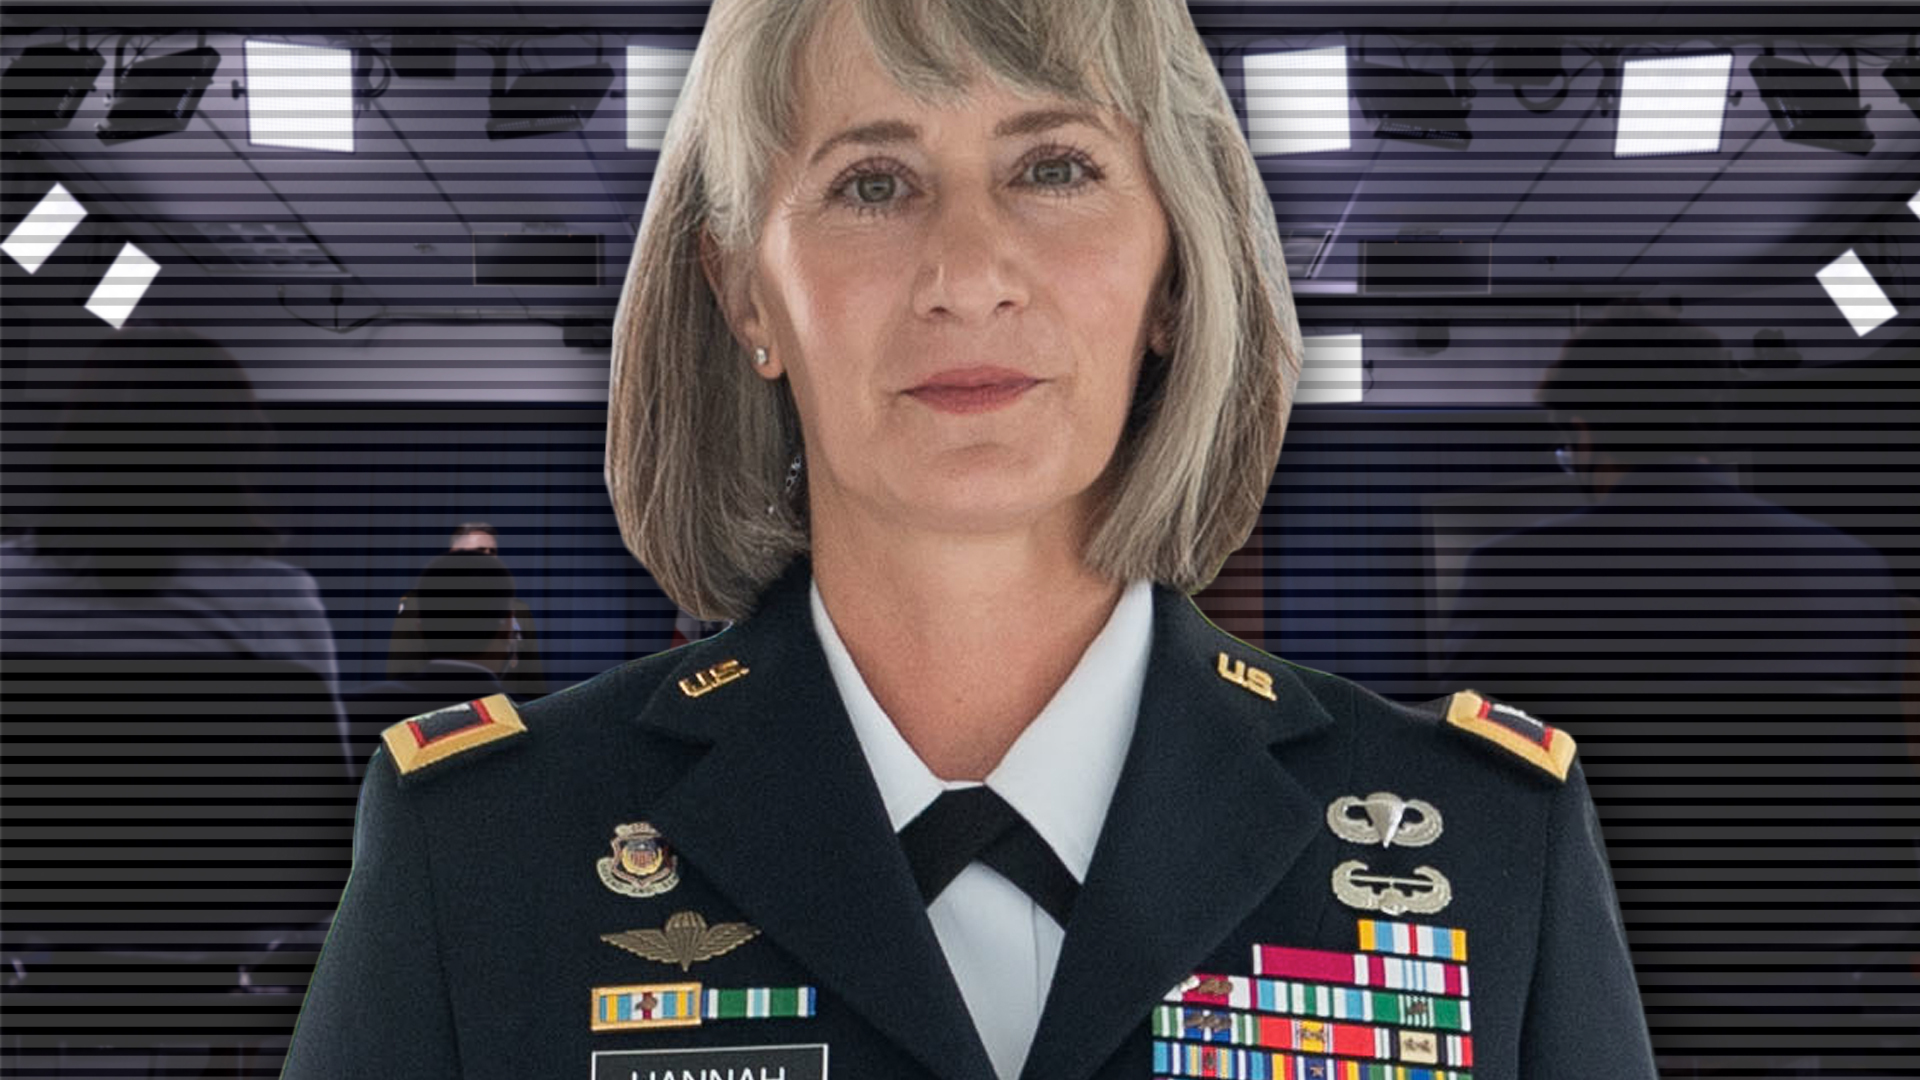 Inside the office of a one-star Army general that 100% of soldiers rated ‘hostile’